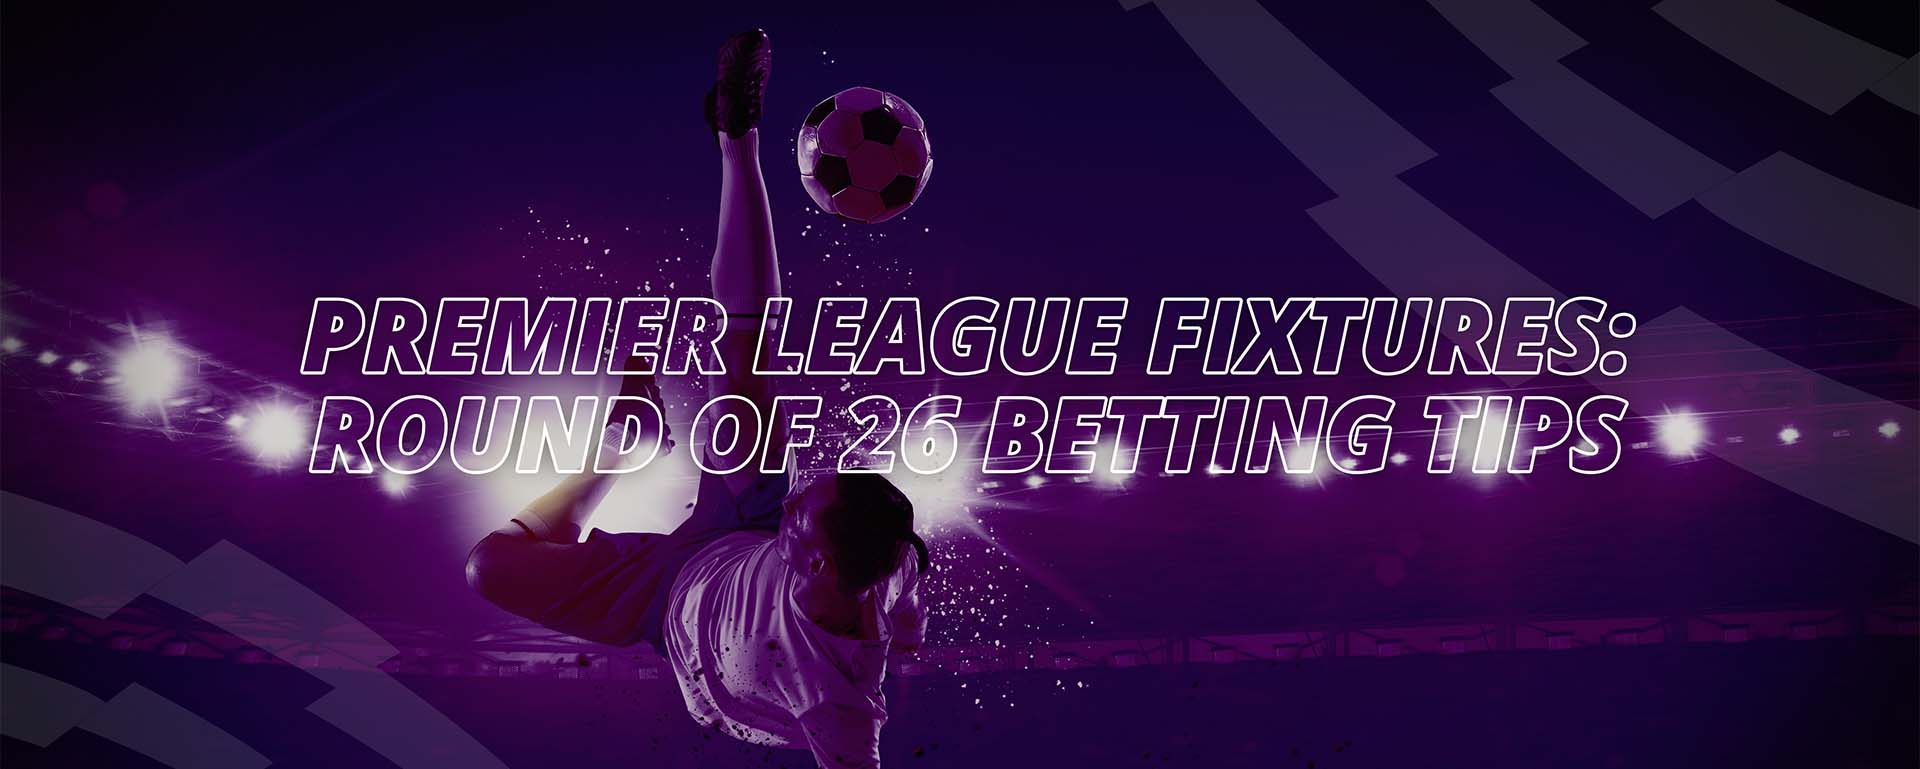 PREMIER LEAGUE ROUND 26: BETTING TIPS